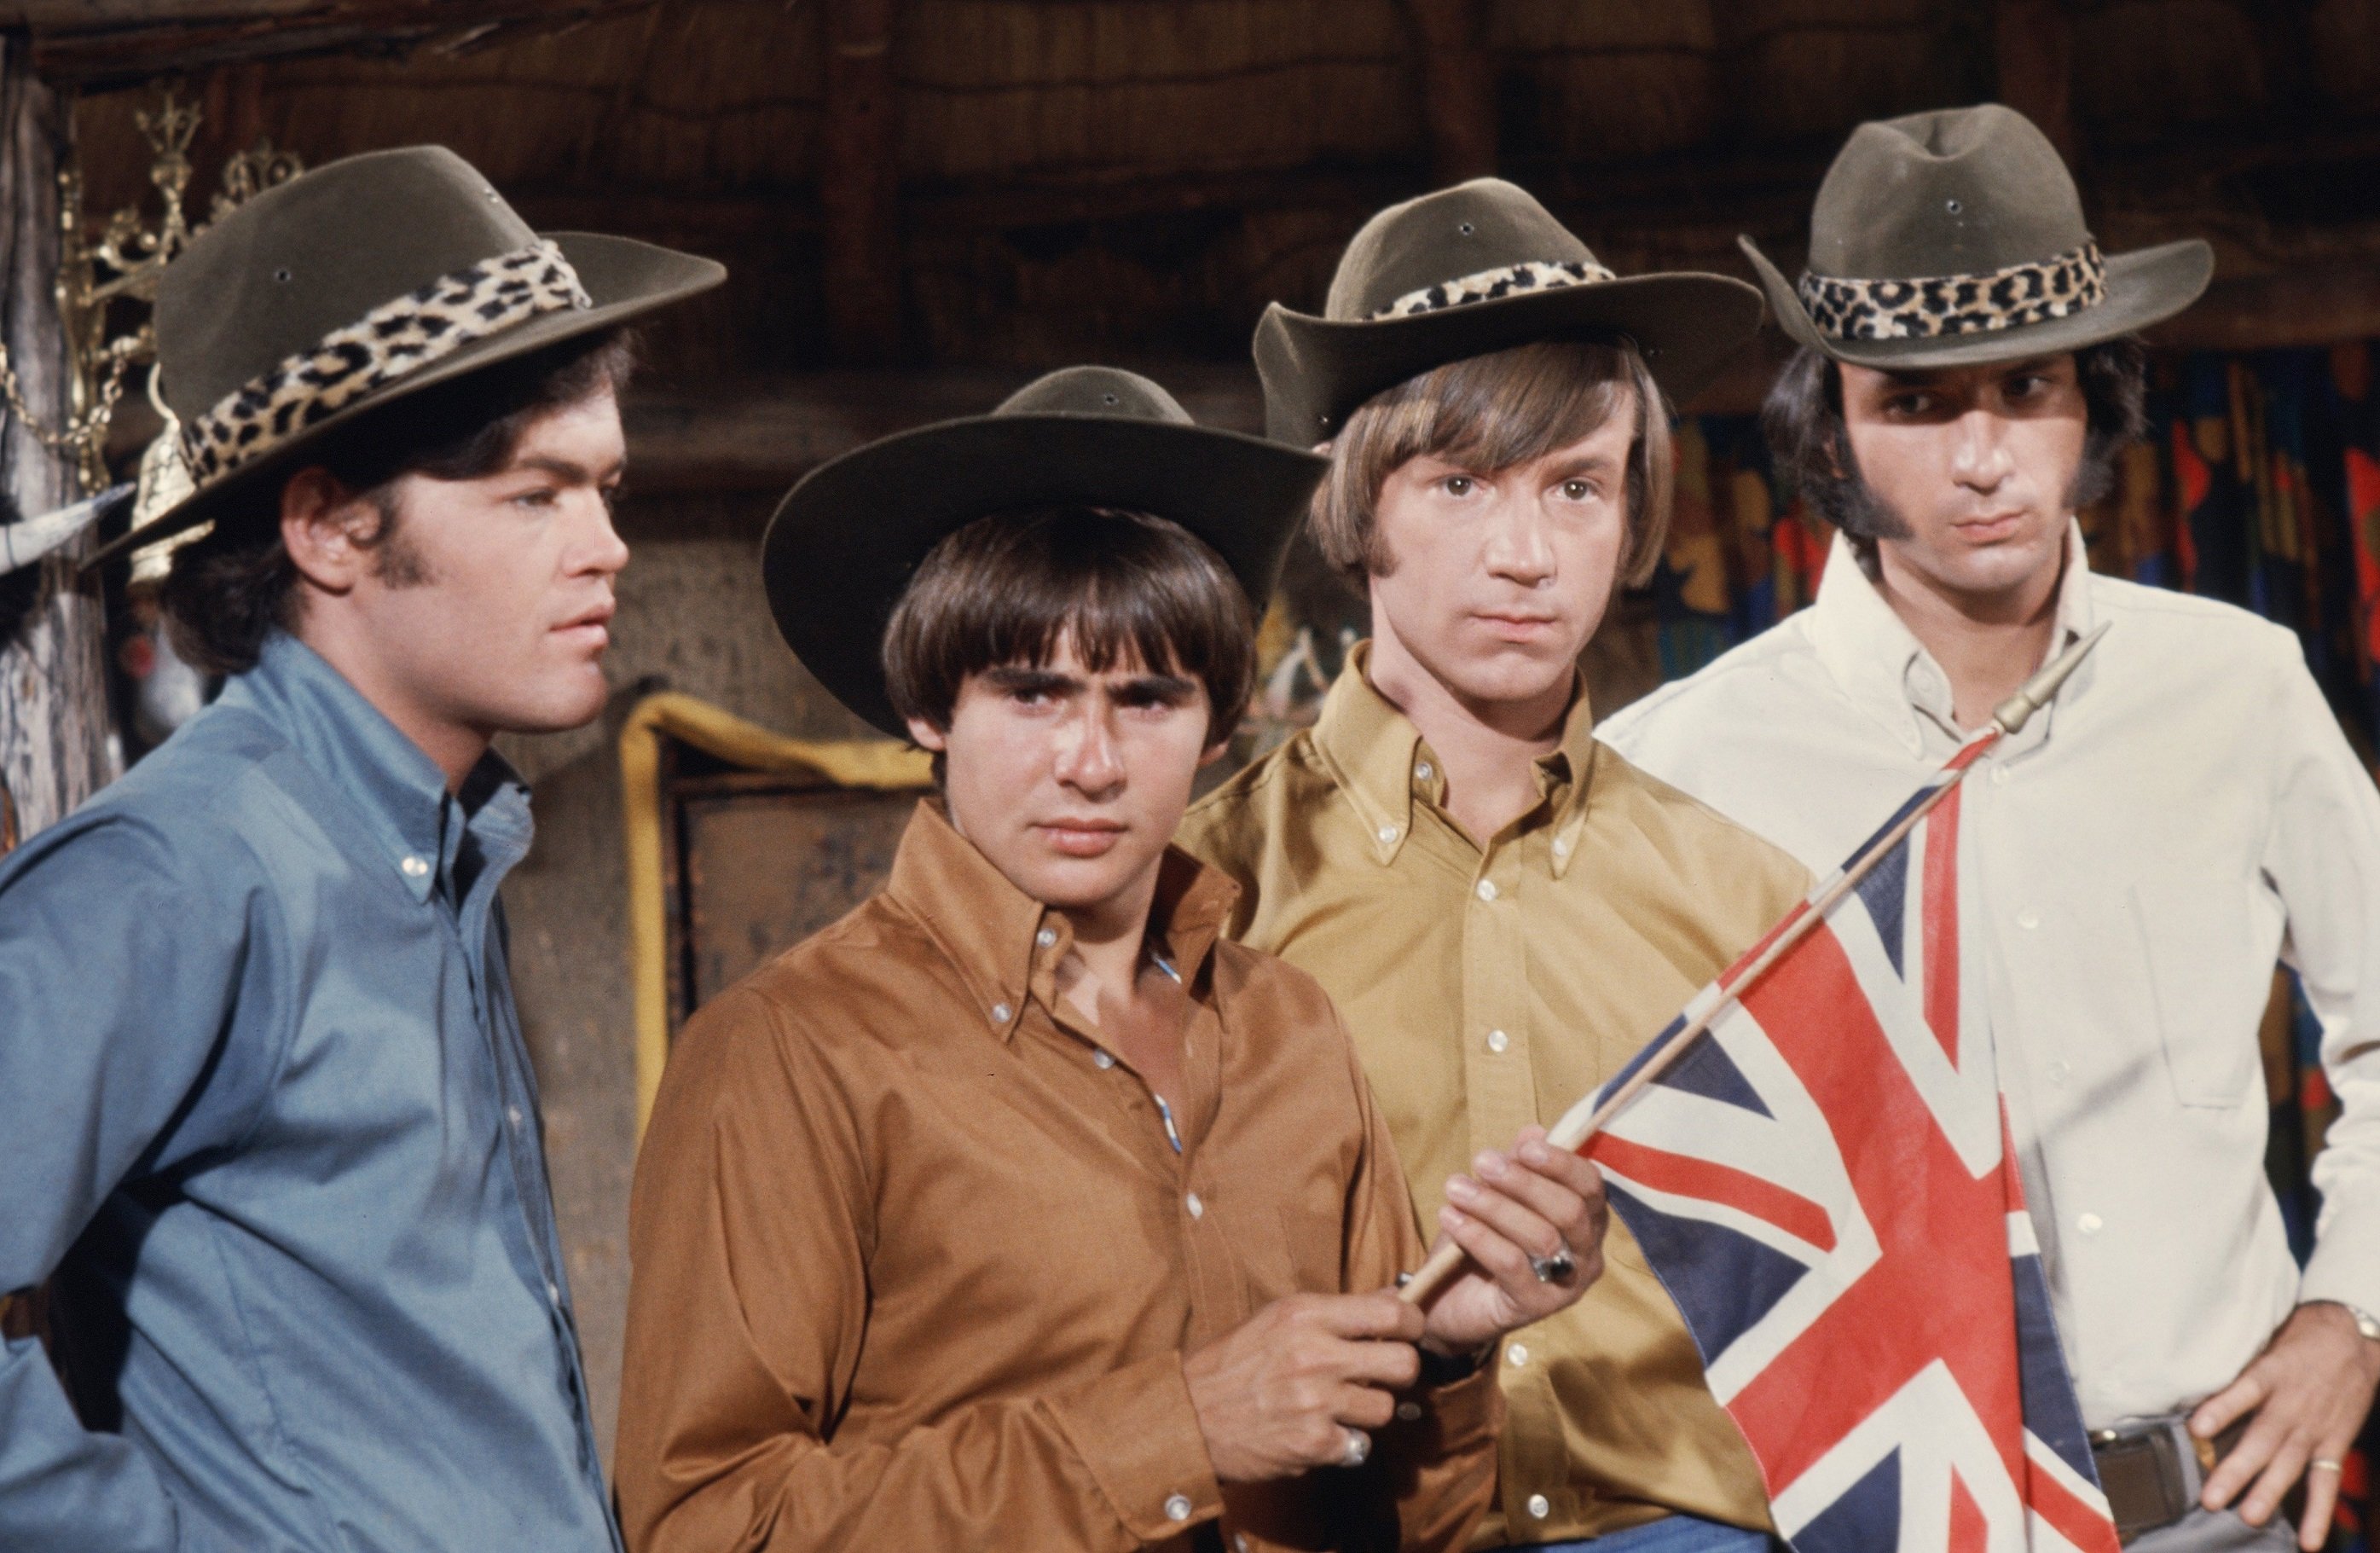 The Monkees' Mickey Dolenz, Davy Jones, Peter Tork, and Mike Nesmith